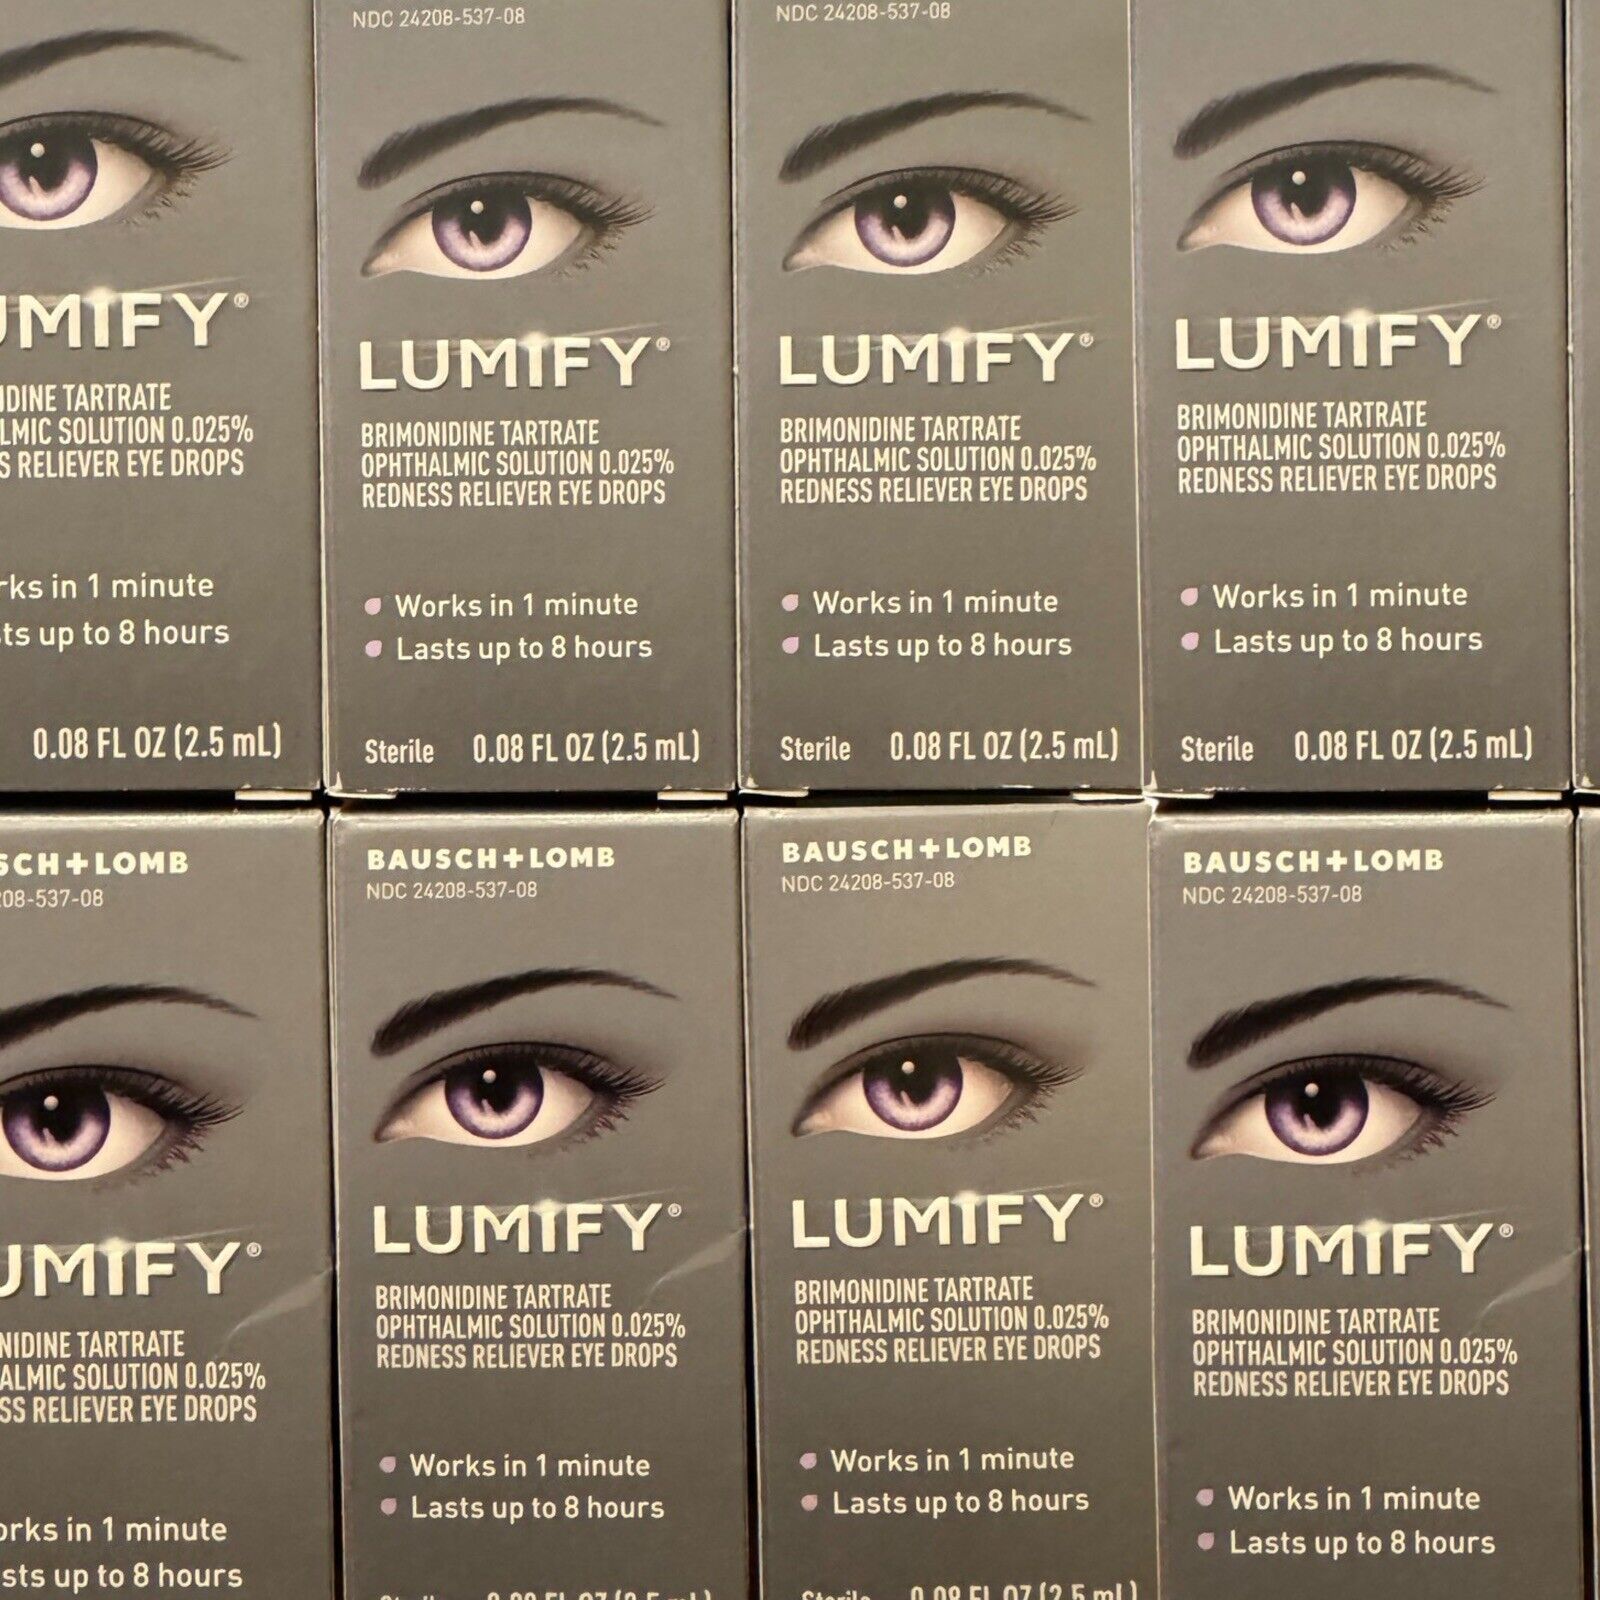 LOT OF 30 - LUMIFY Redness Reliever Eye Drops 0.08 FI. Oz. (2.5 mL)